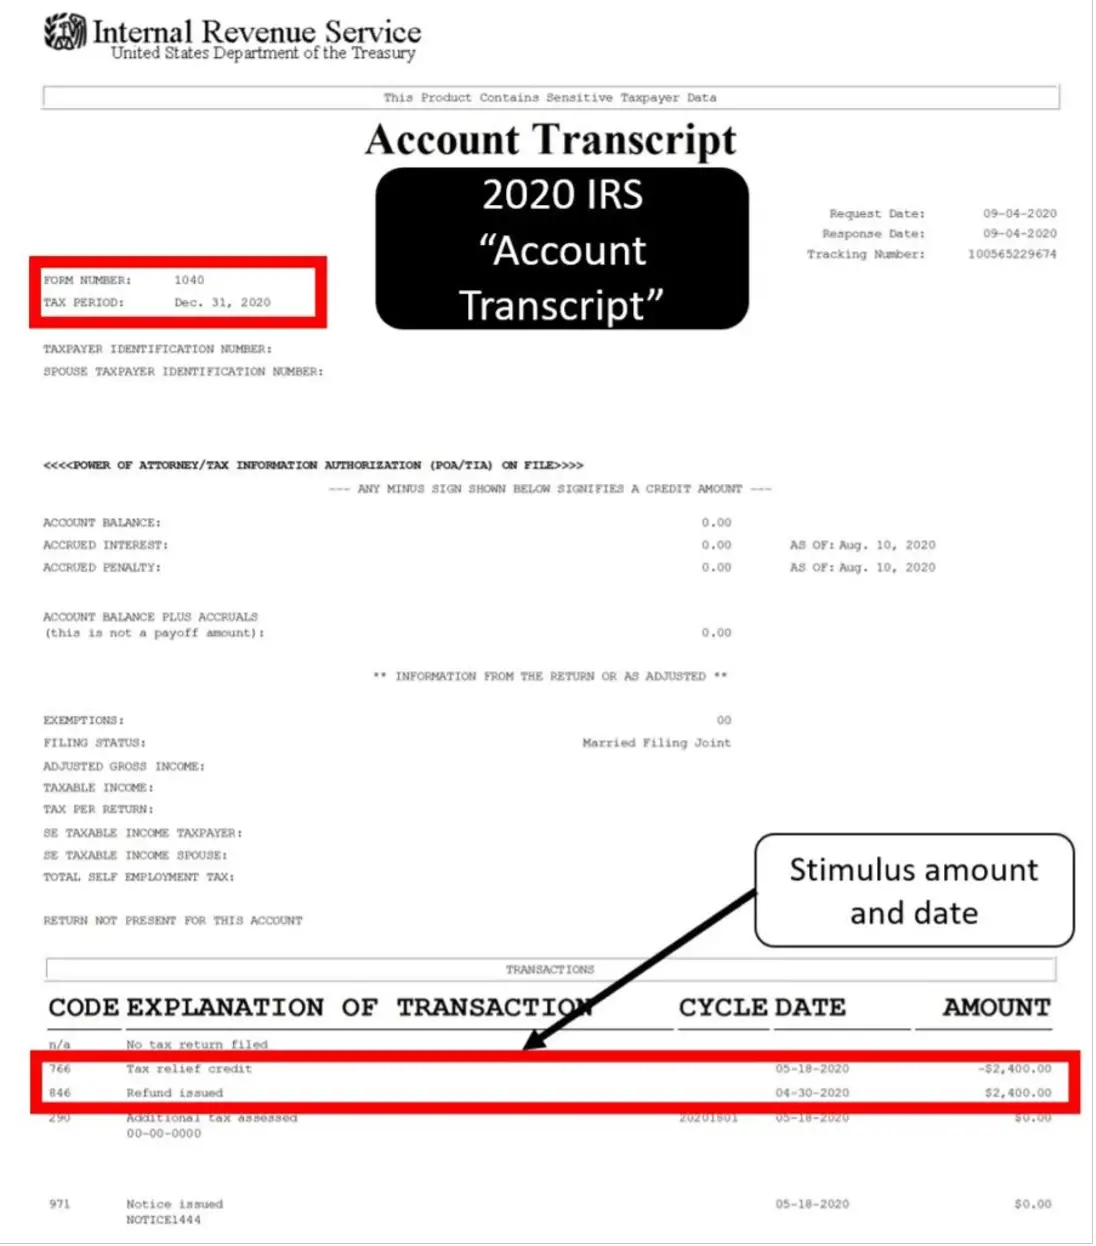 IRS transcripts now provide stimulus payment information